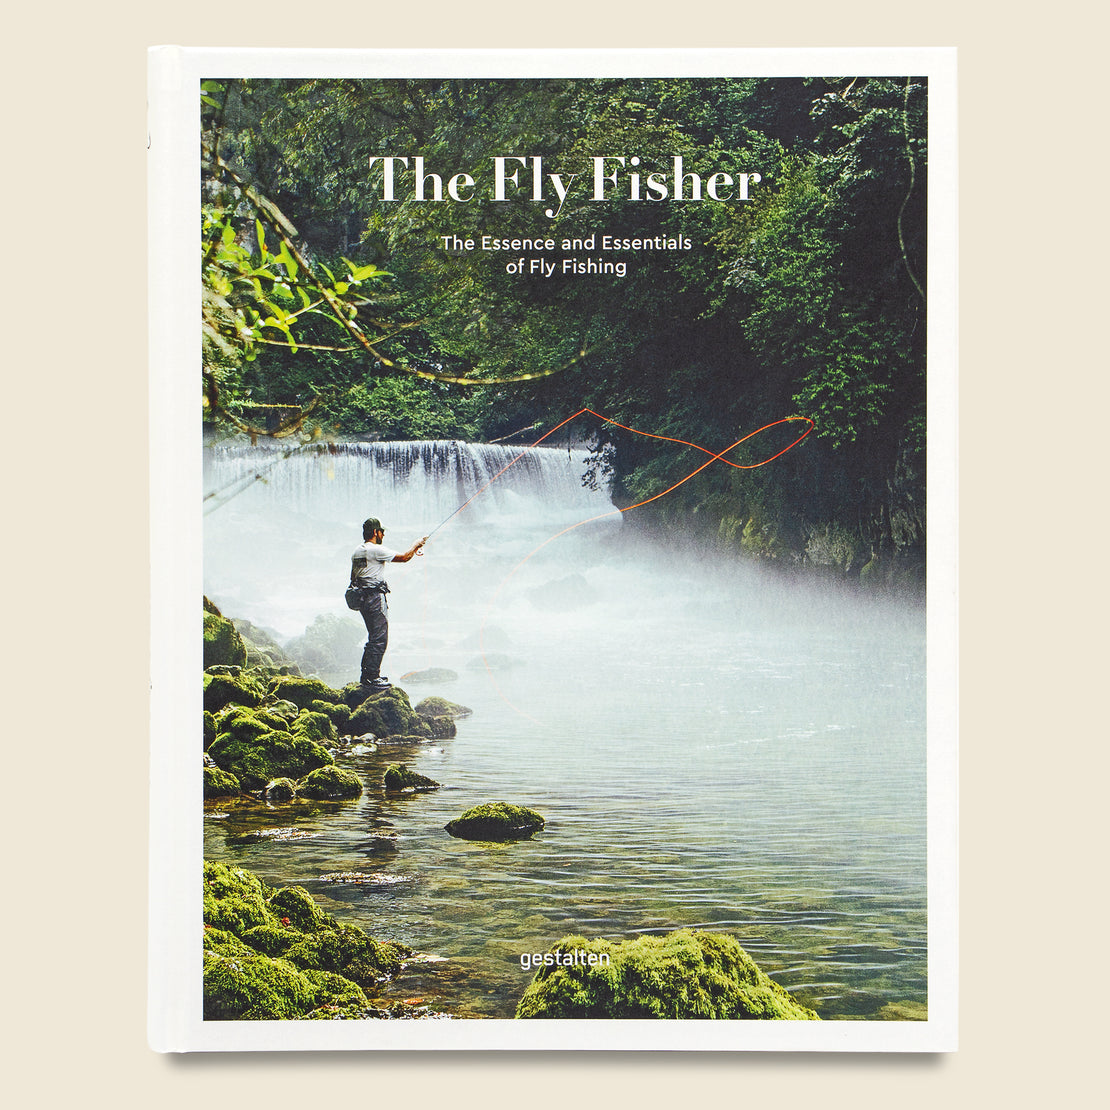 Bookstore The Fly Fisher: The Essence and Essentials of Fly Fishing